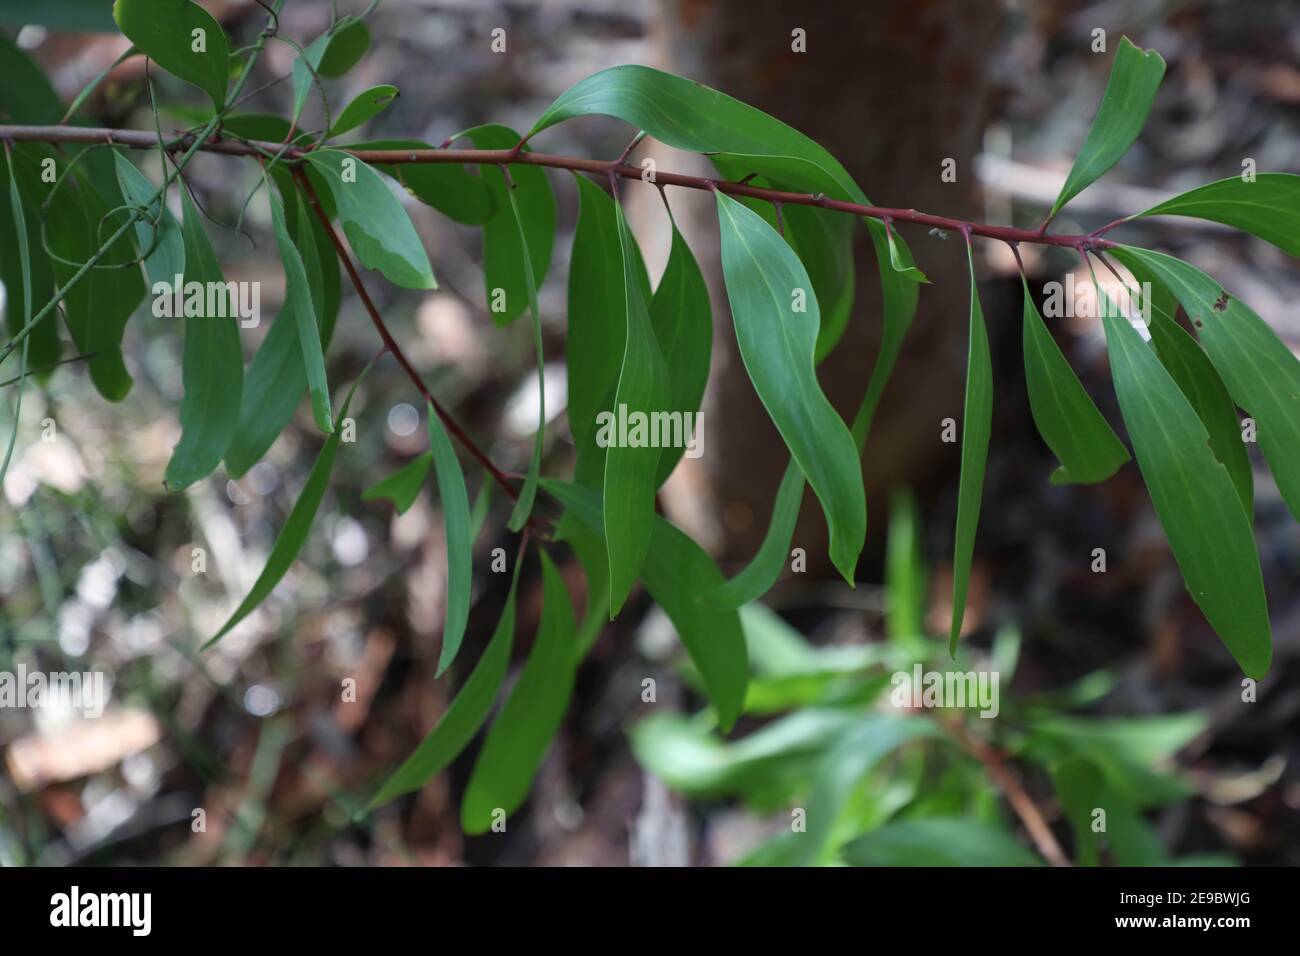 Persoonia levis, commonly known as the broad-leaved geebung, is a shrub native to New South Wales and Victoria in eastern Australia. Pictured in Field Stock Photo